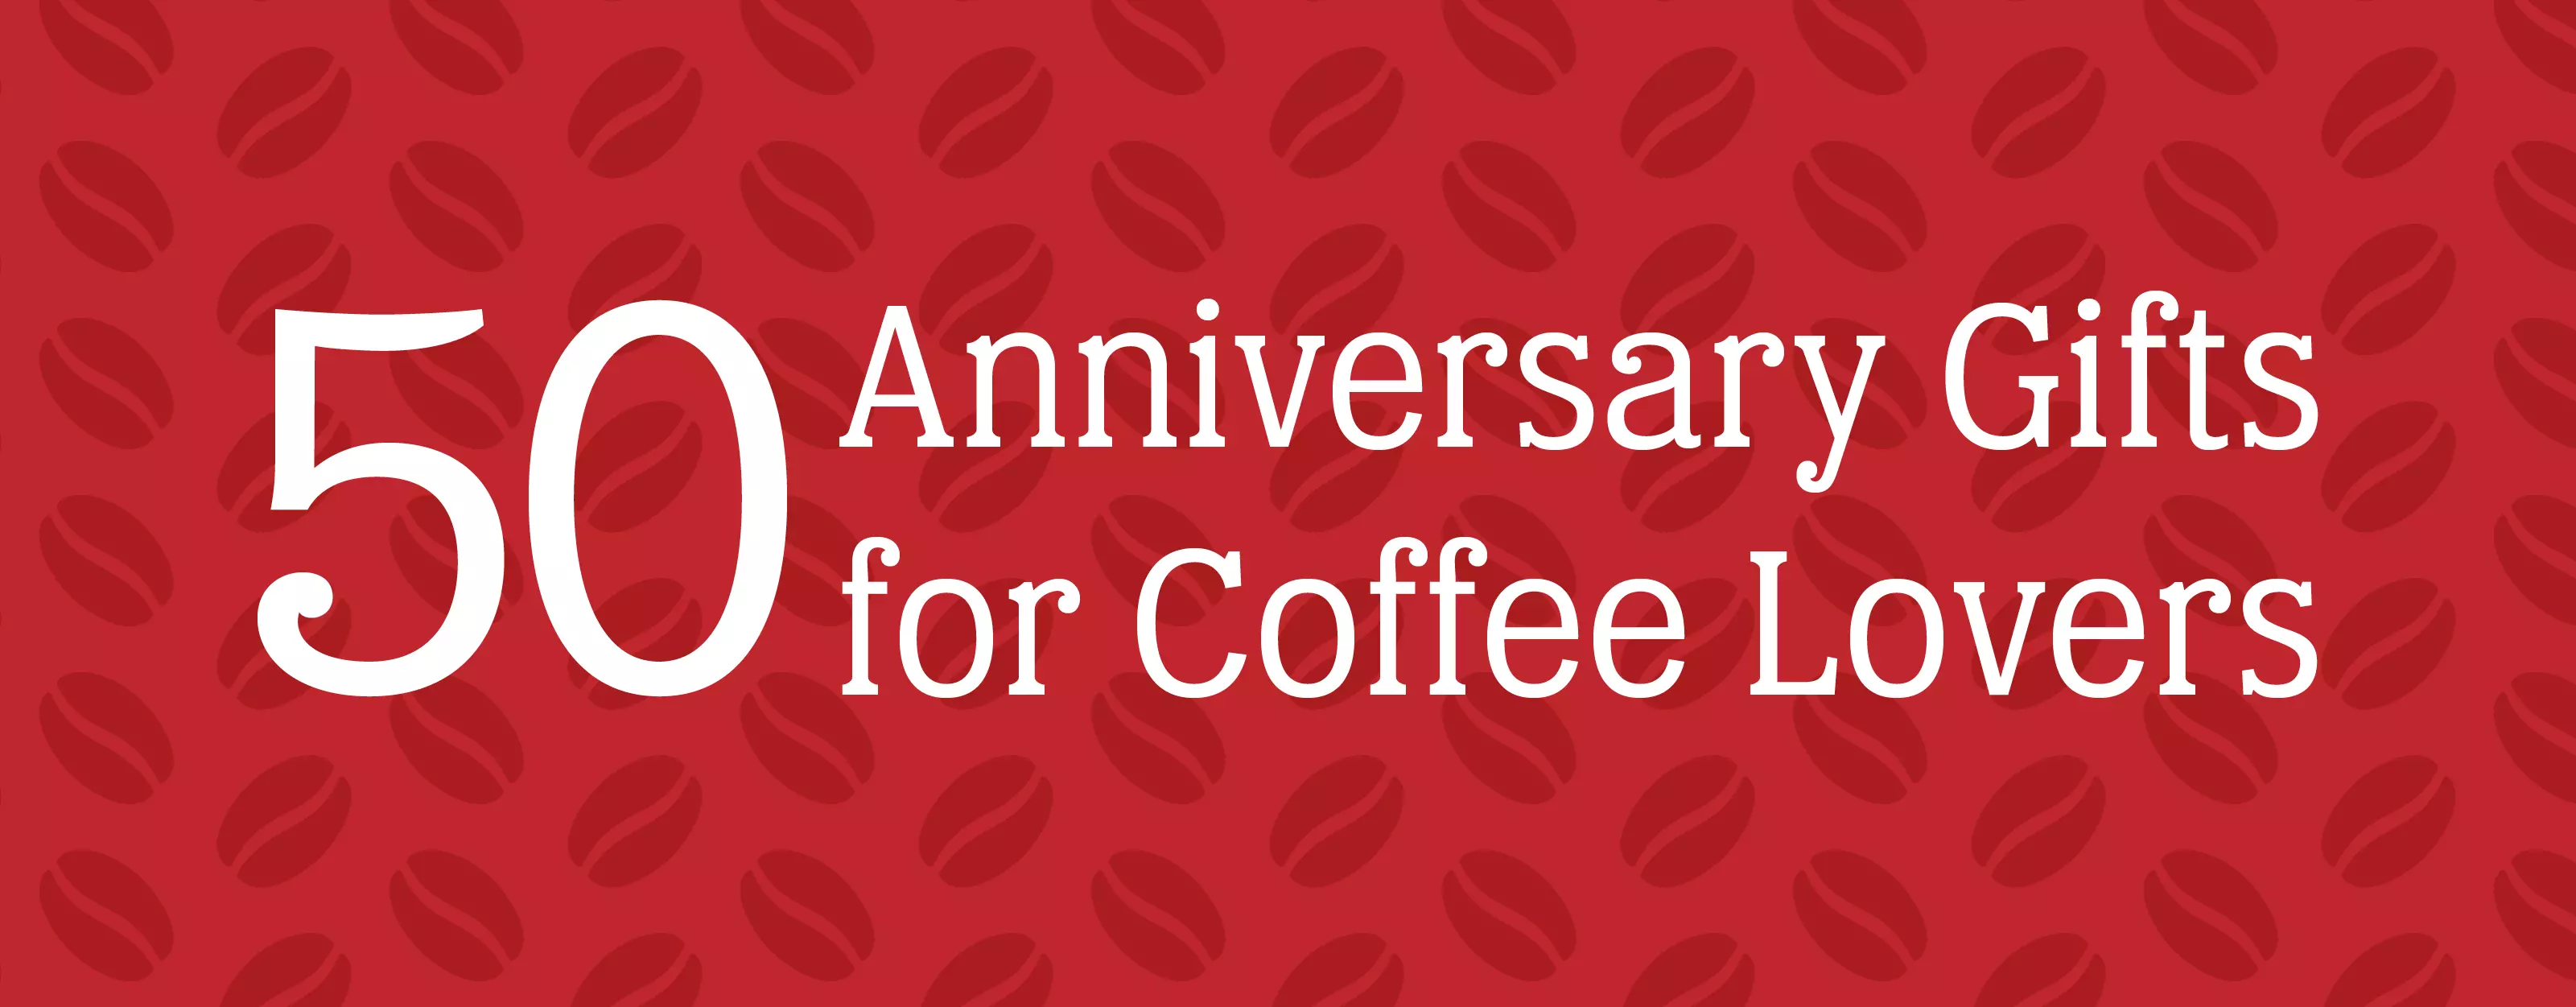 Red background with a white text overlay that reads "50 Anniversary Gifts for Coffee Lovers"